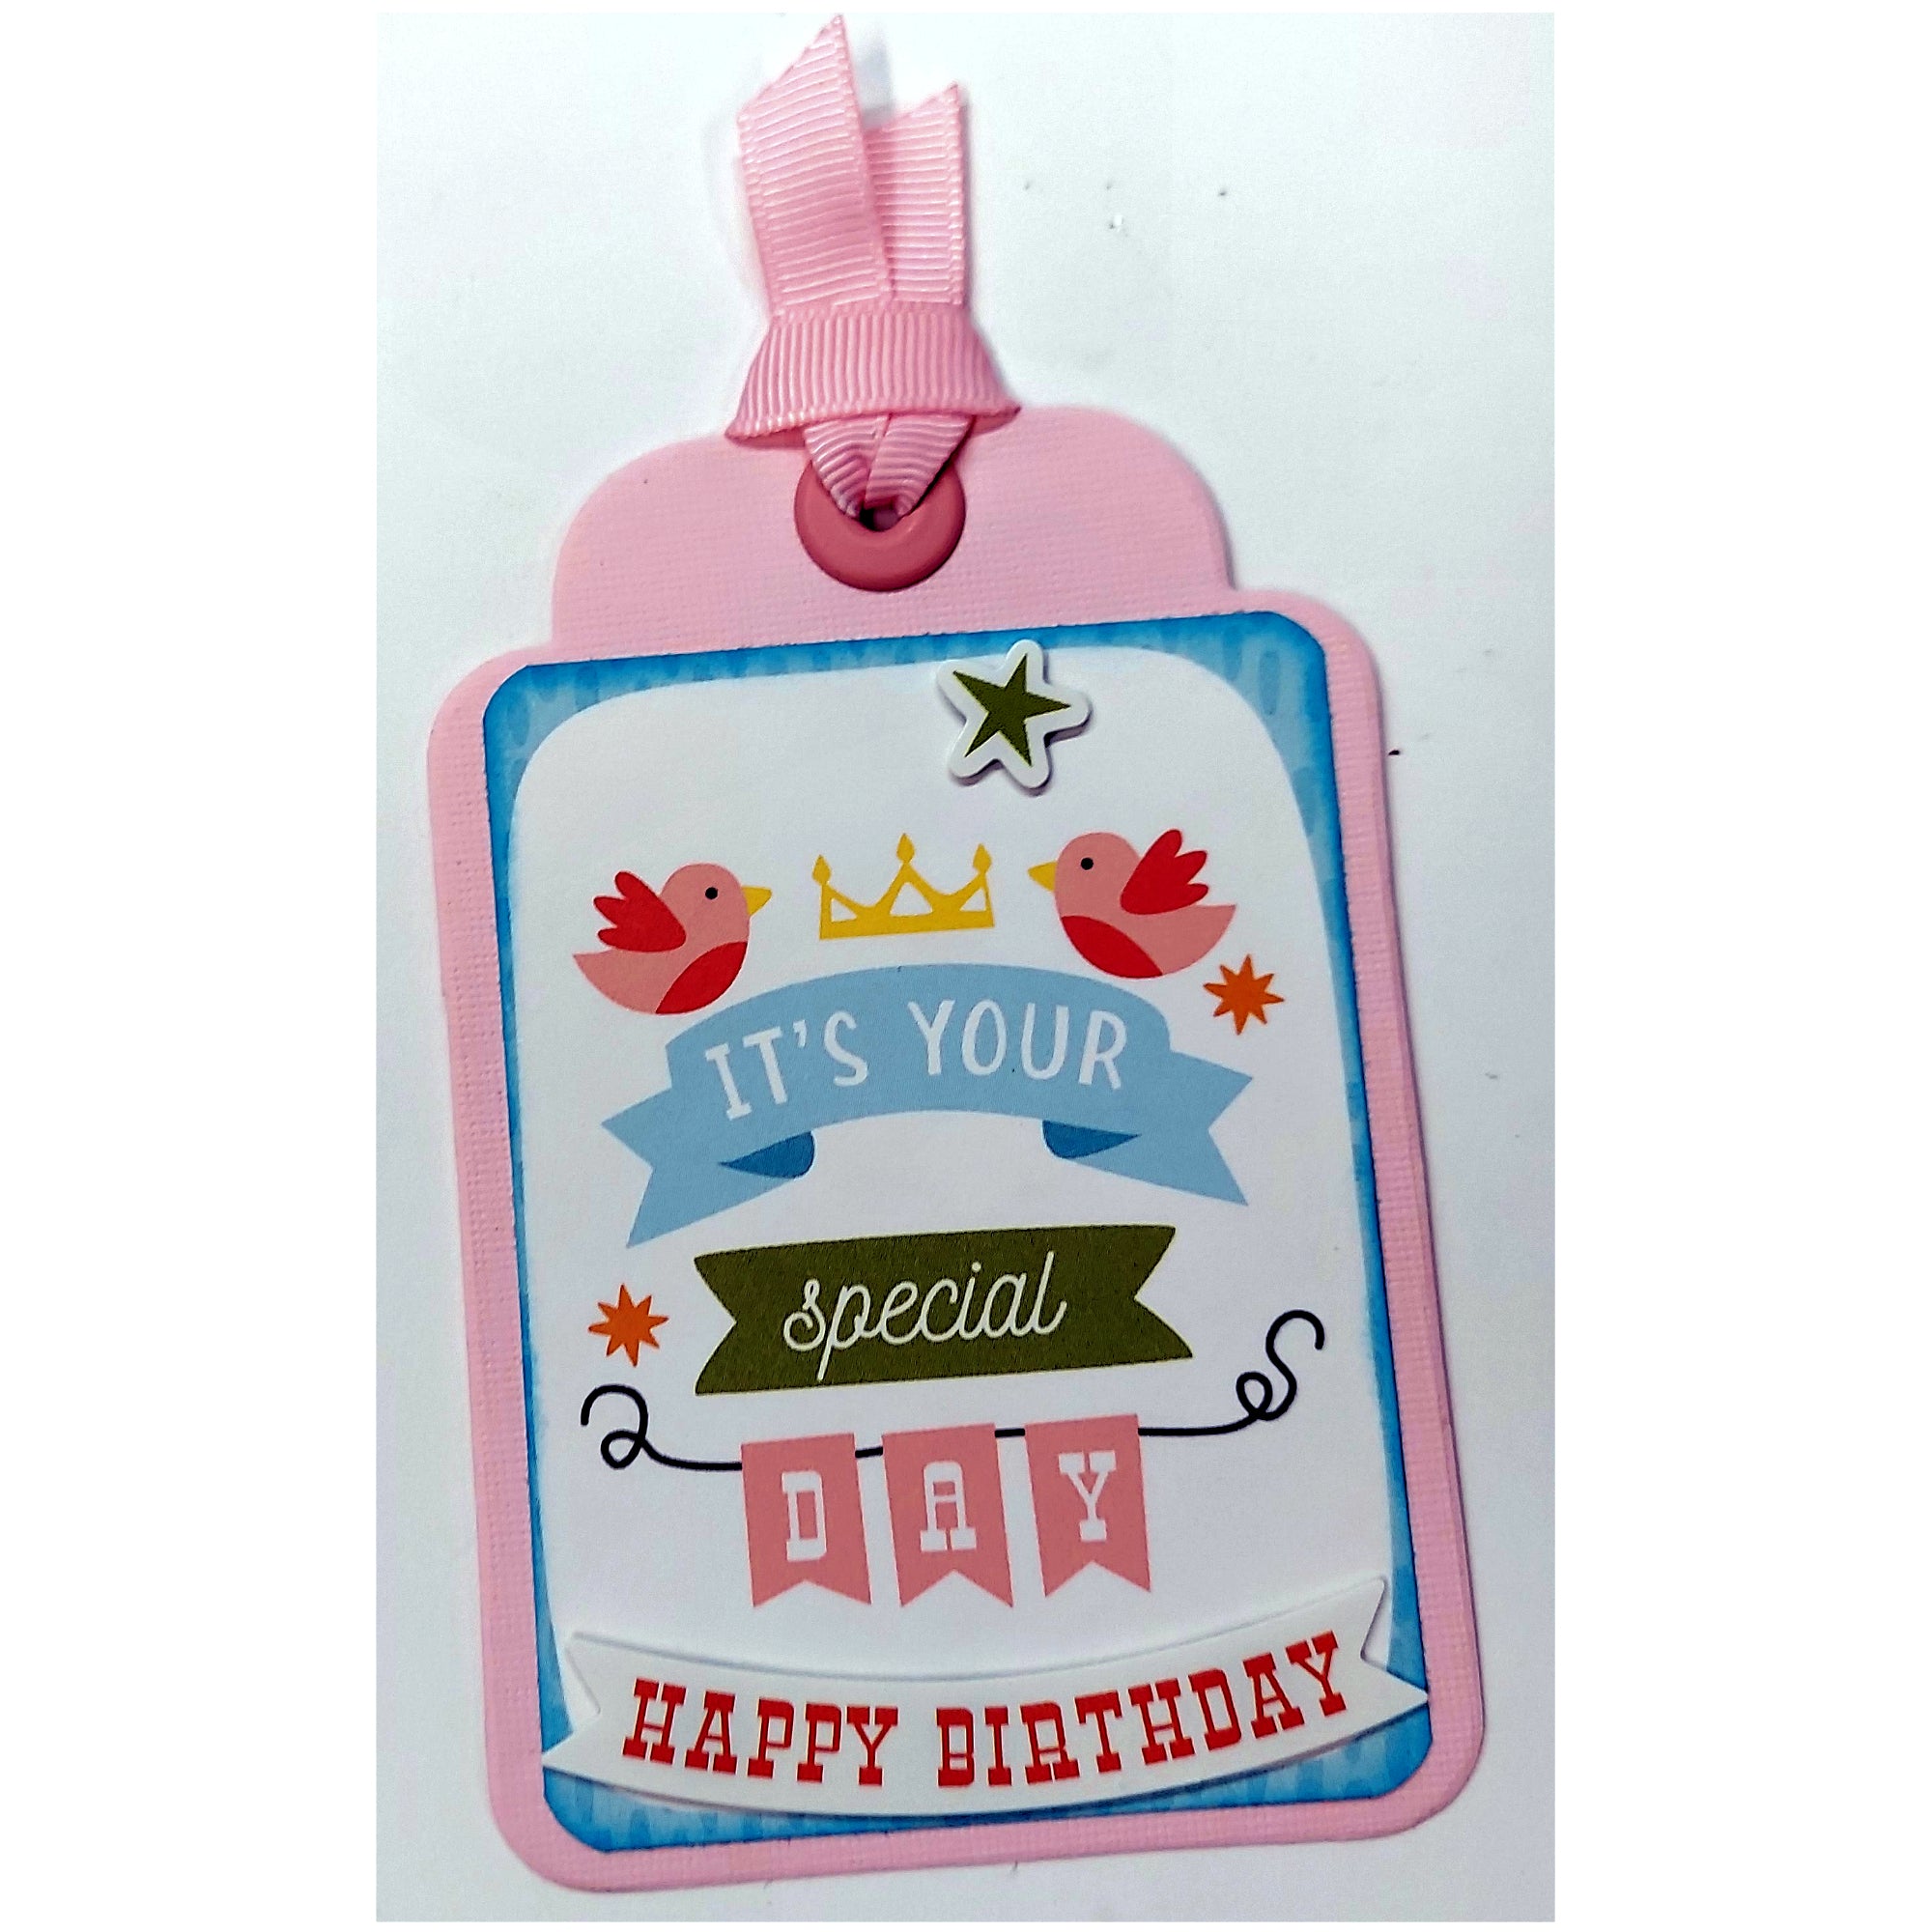 It's Your Special Day Tag 3 x 5 Coordinating Scrapbook Tag Embellishment by SSC Designs